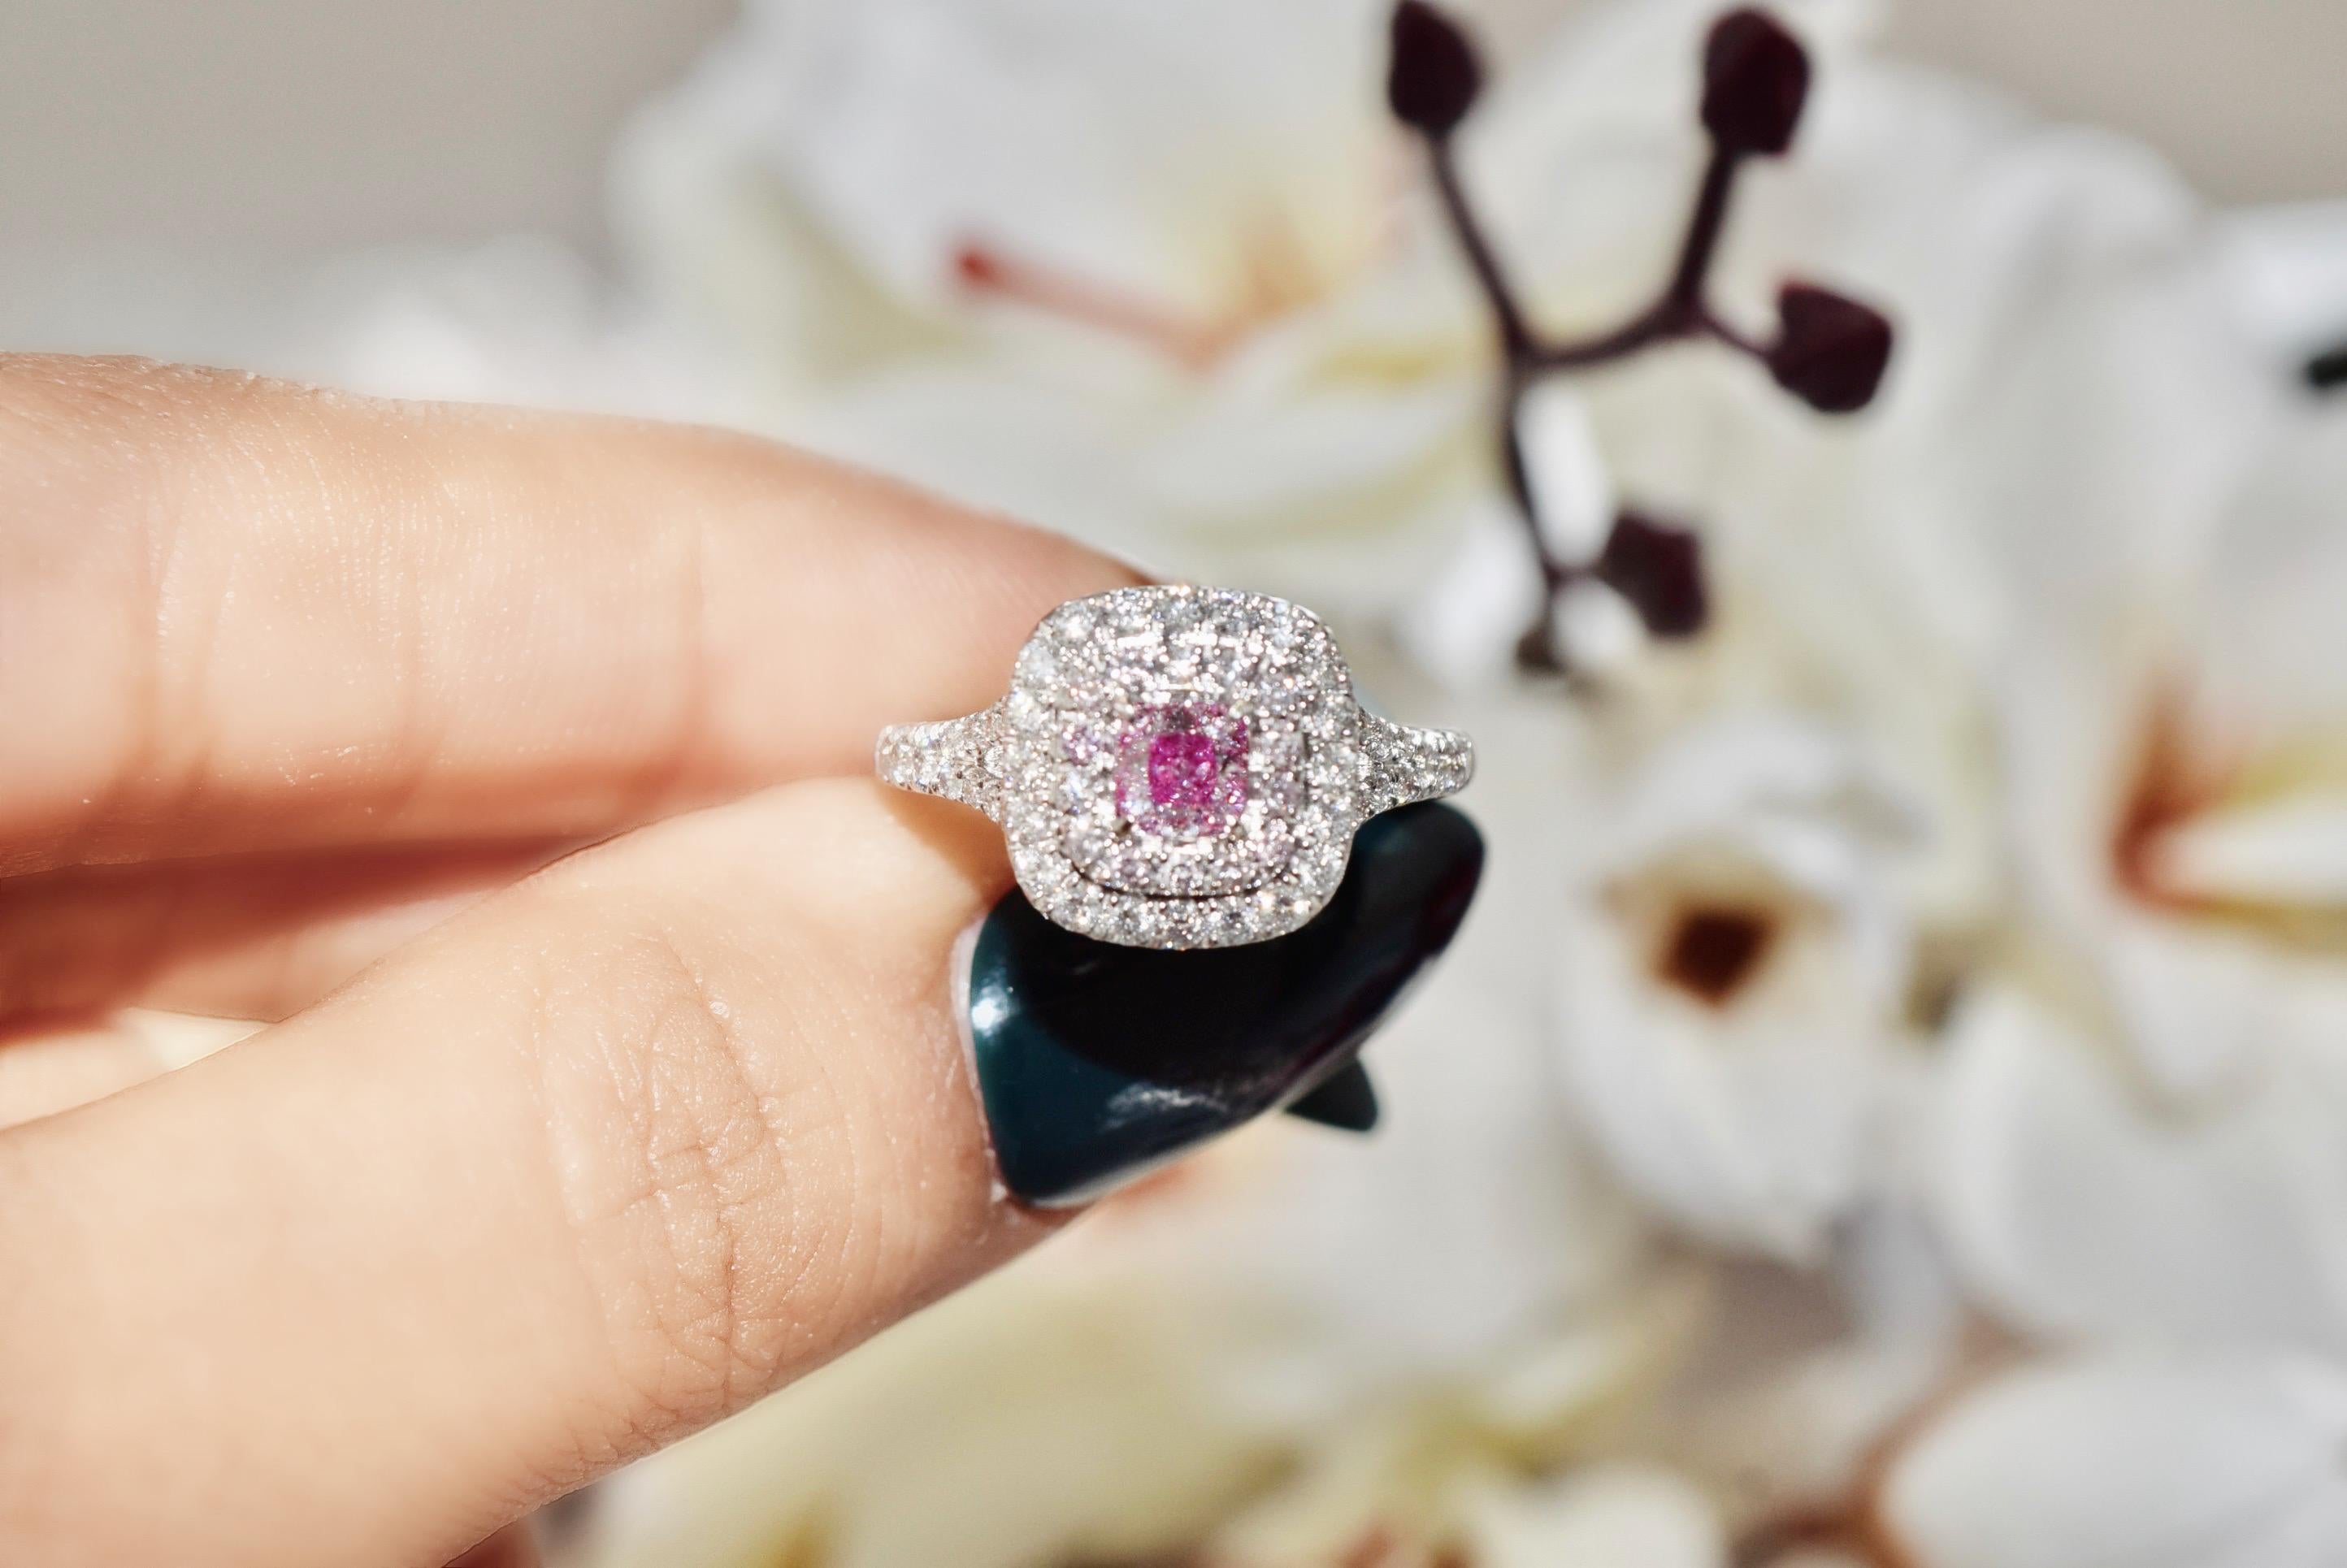 **100% NATURAL FANCY COLOUR DIAMOND JEWELRY**

✪ Jewelry Details ✪

♦ MAIN STONE DETAILS

➛ Stone Shape: Cushion
➛ Stone Color: Faint pink
➛ Stone Clarity: SI1
➛ Stone Weight: 0.40 carats
➛ GIA certified

♦ SIDE STONE DETAILS

➛ Side white diamonds